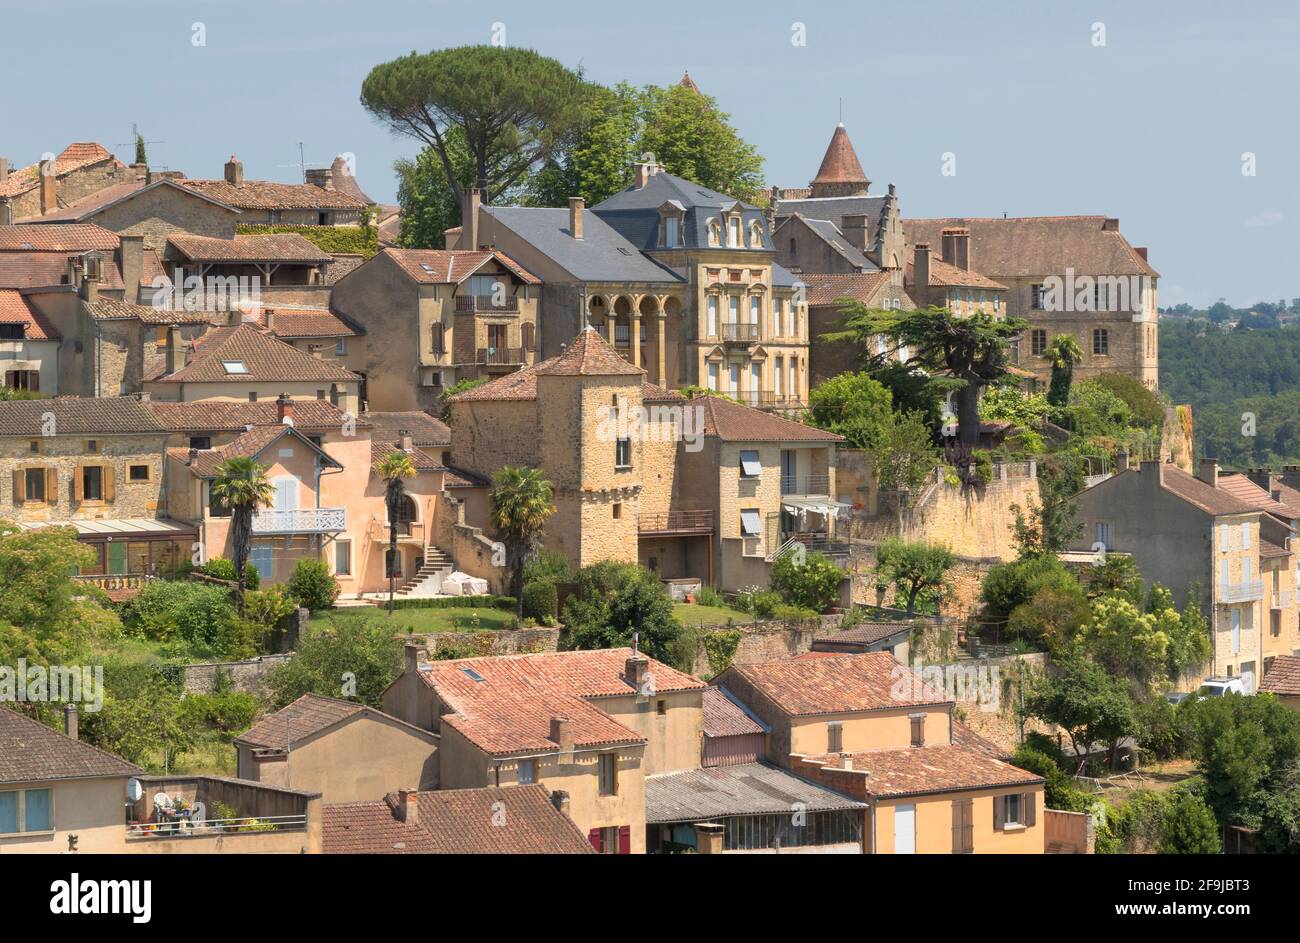 Belvès, in the Dordogne, is considered to be one of the most beautiful towns in France. The name quite literally means 'Beautiful view'. Stock Photo